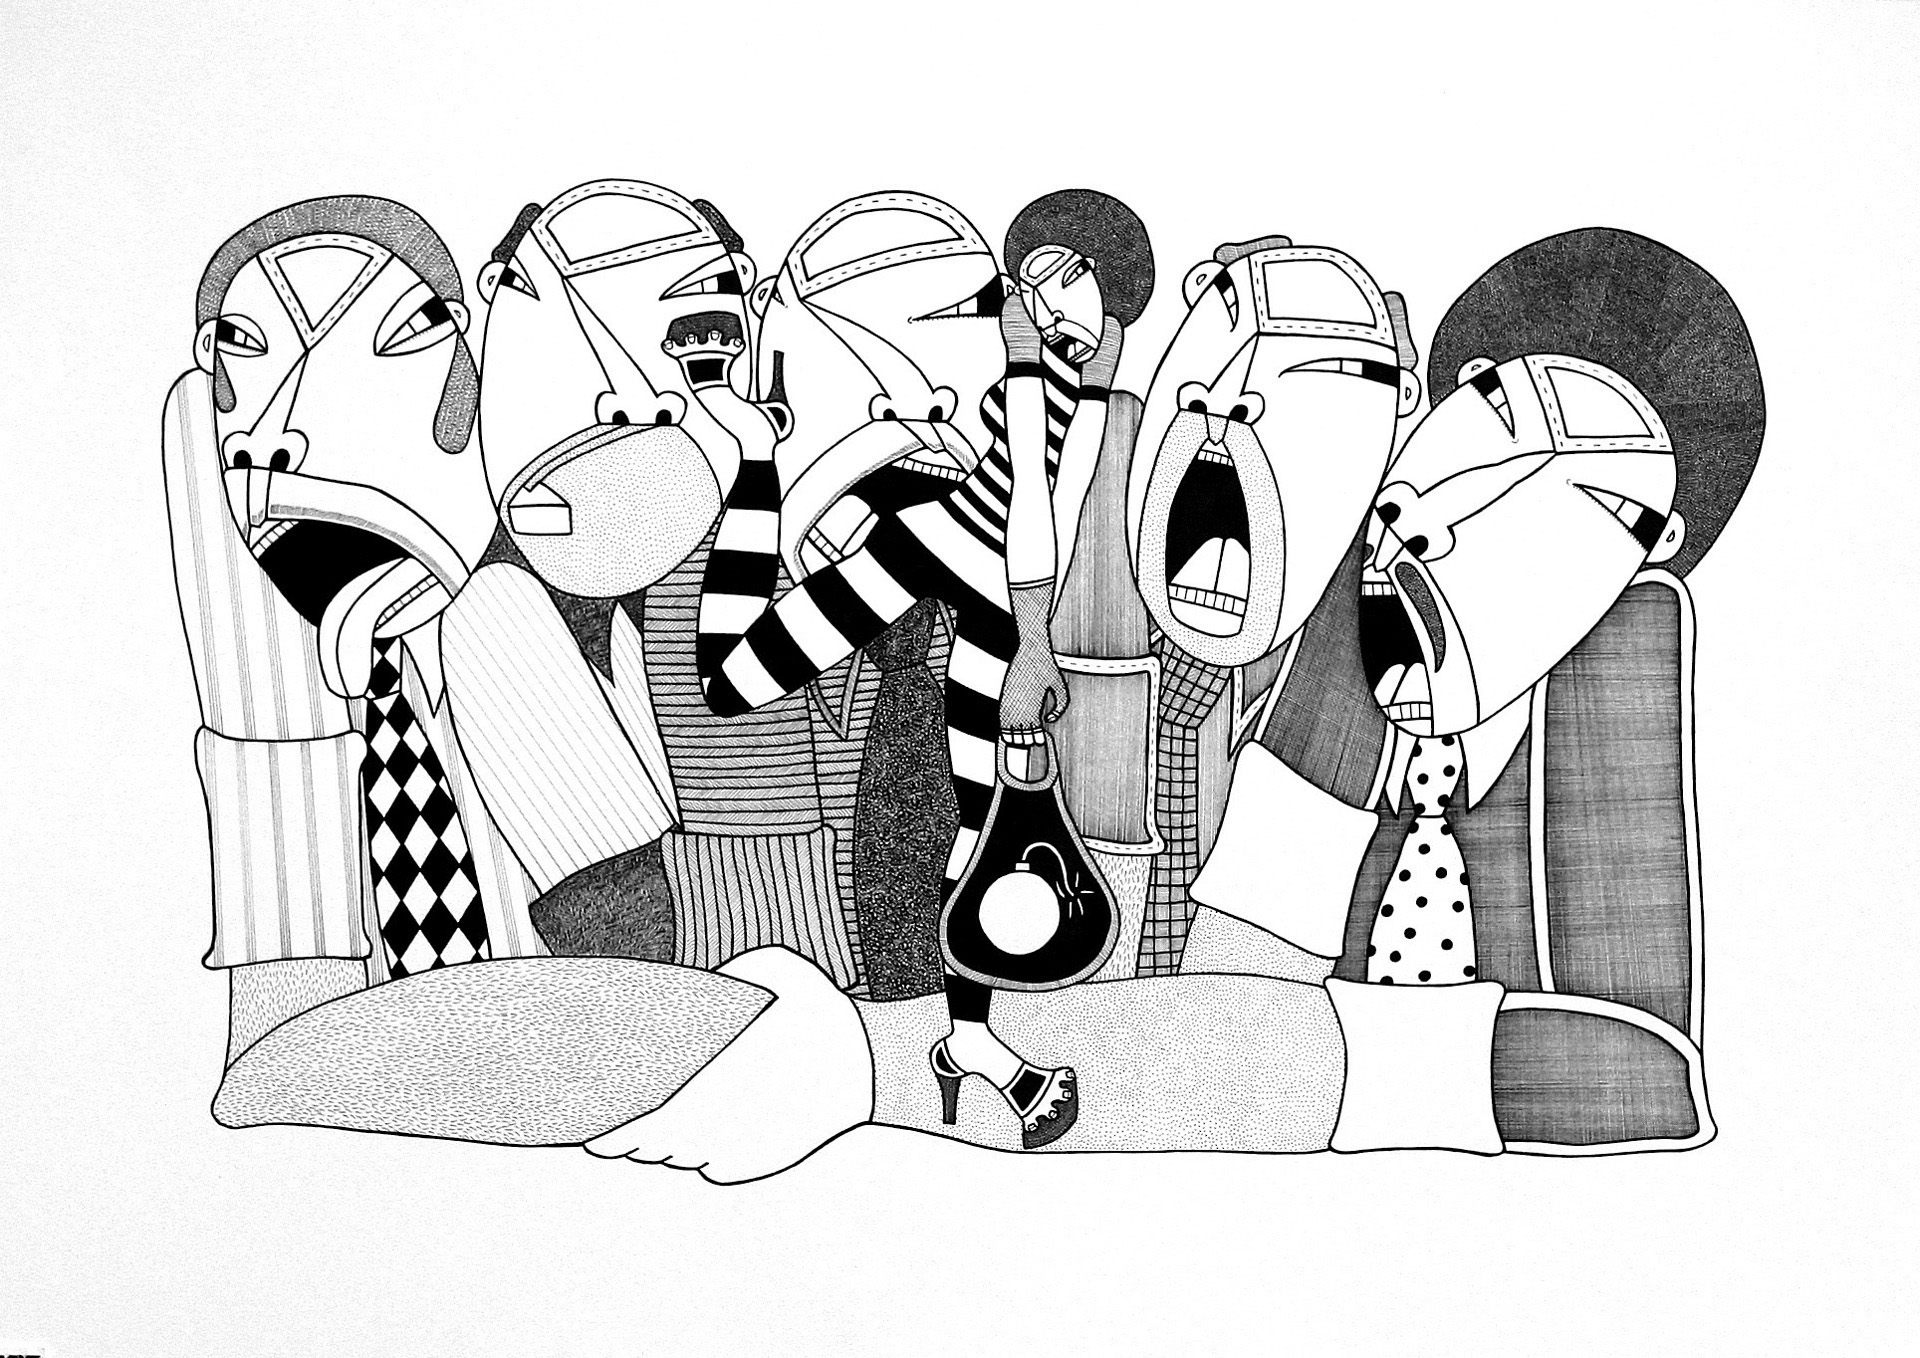 Five Wise Men, ink on paper, 15" x 22", 2010, private collection